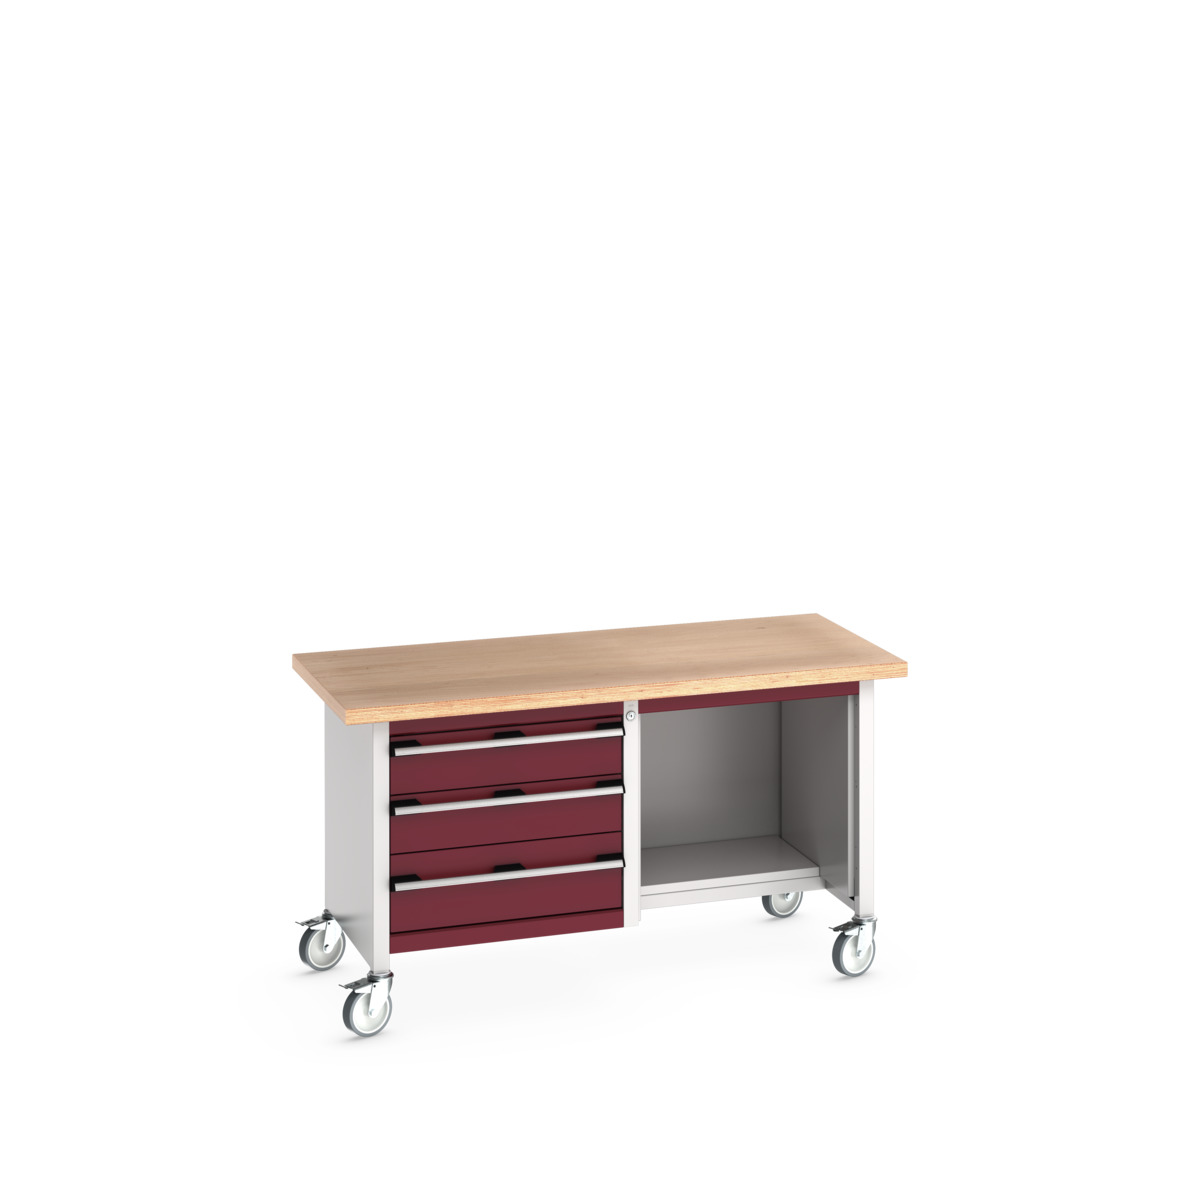 41002115.24V - cubio mobile storage bench (mpx)